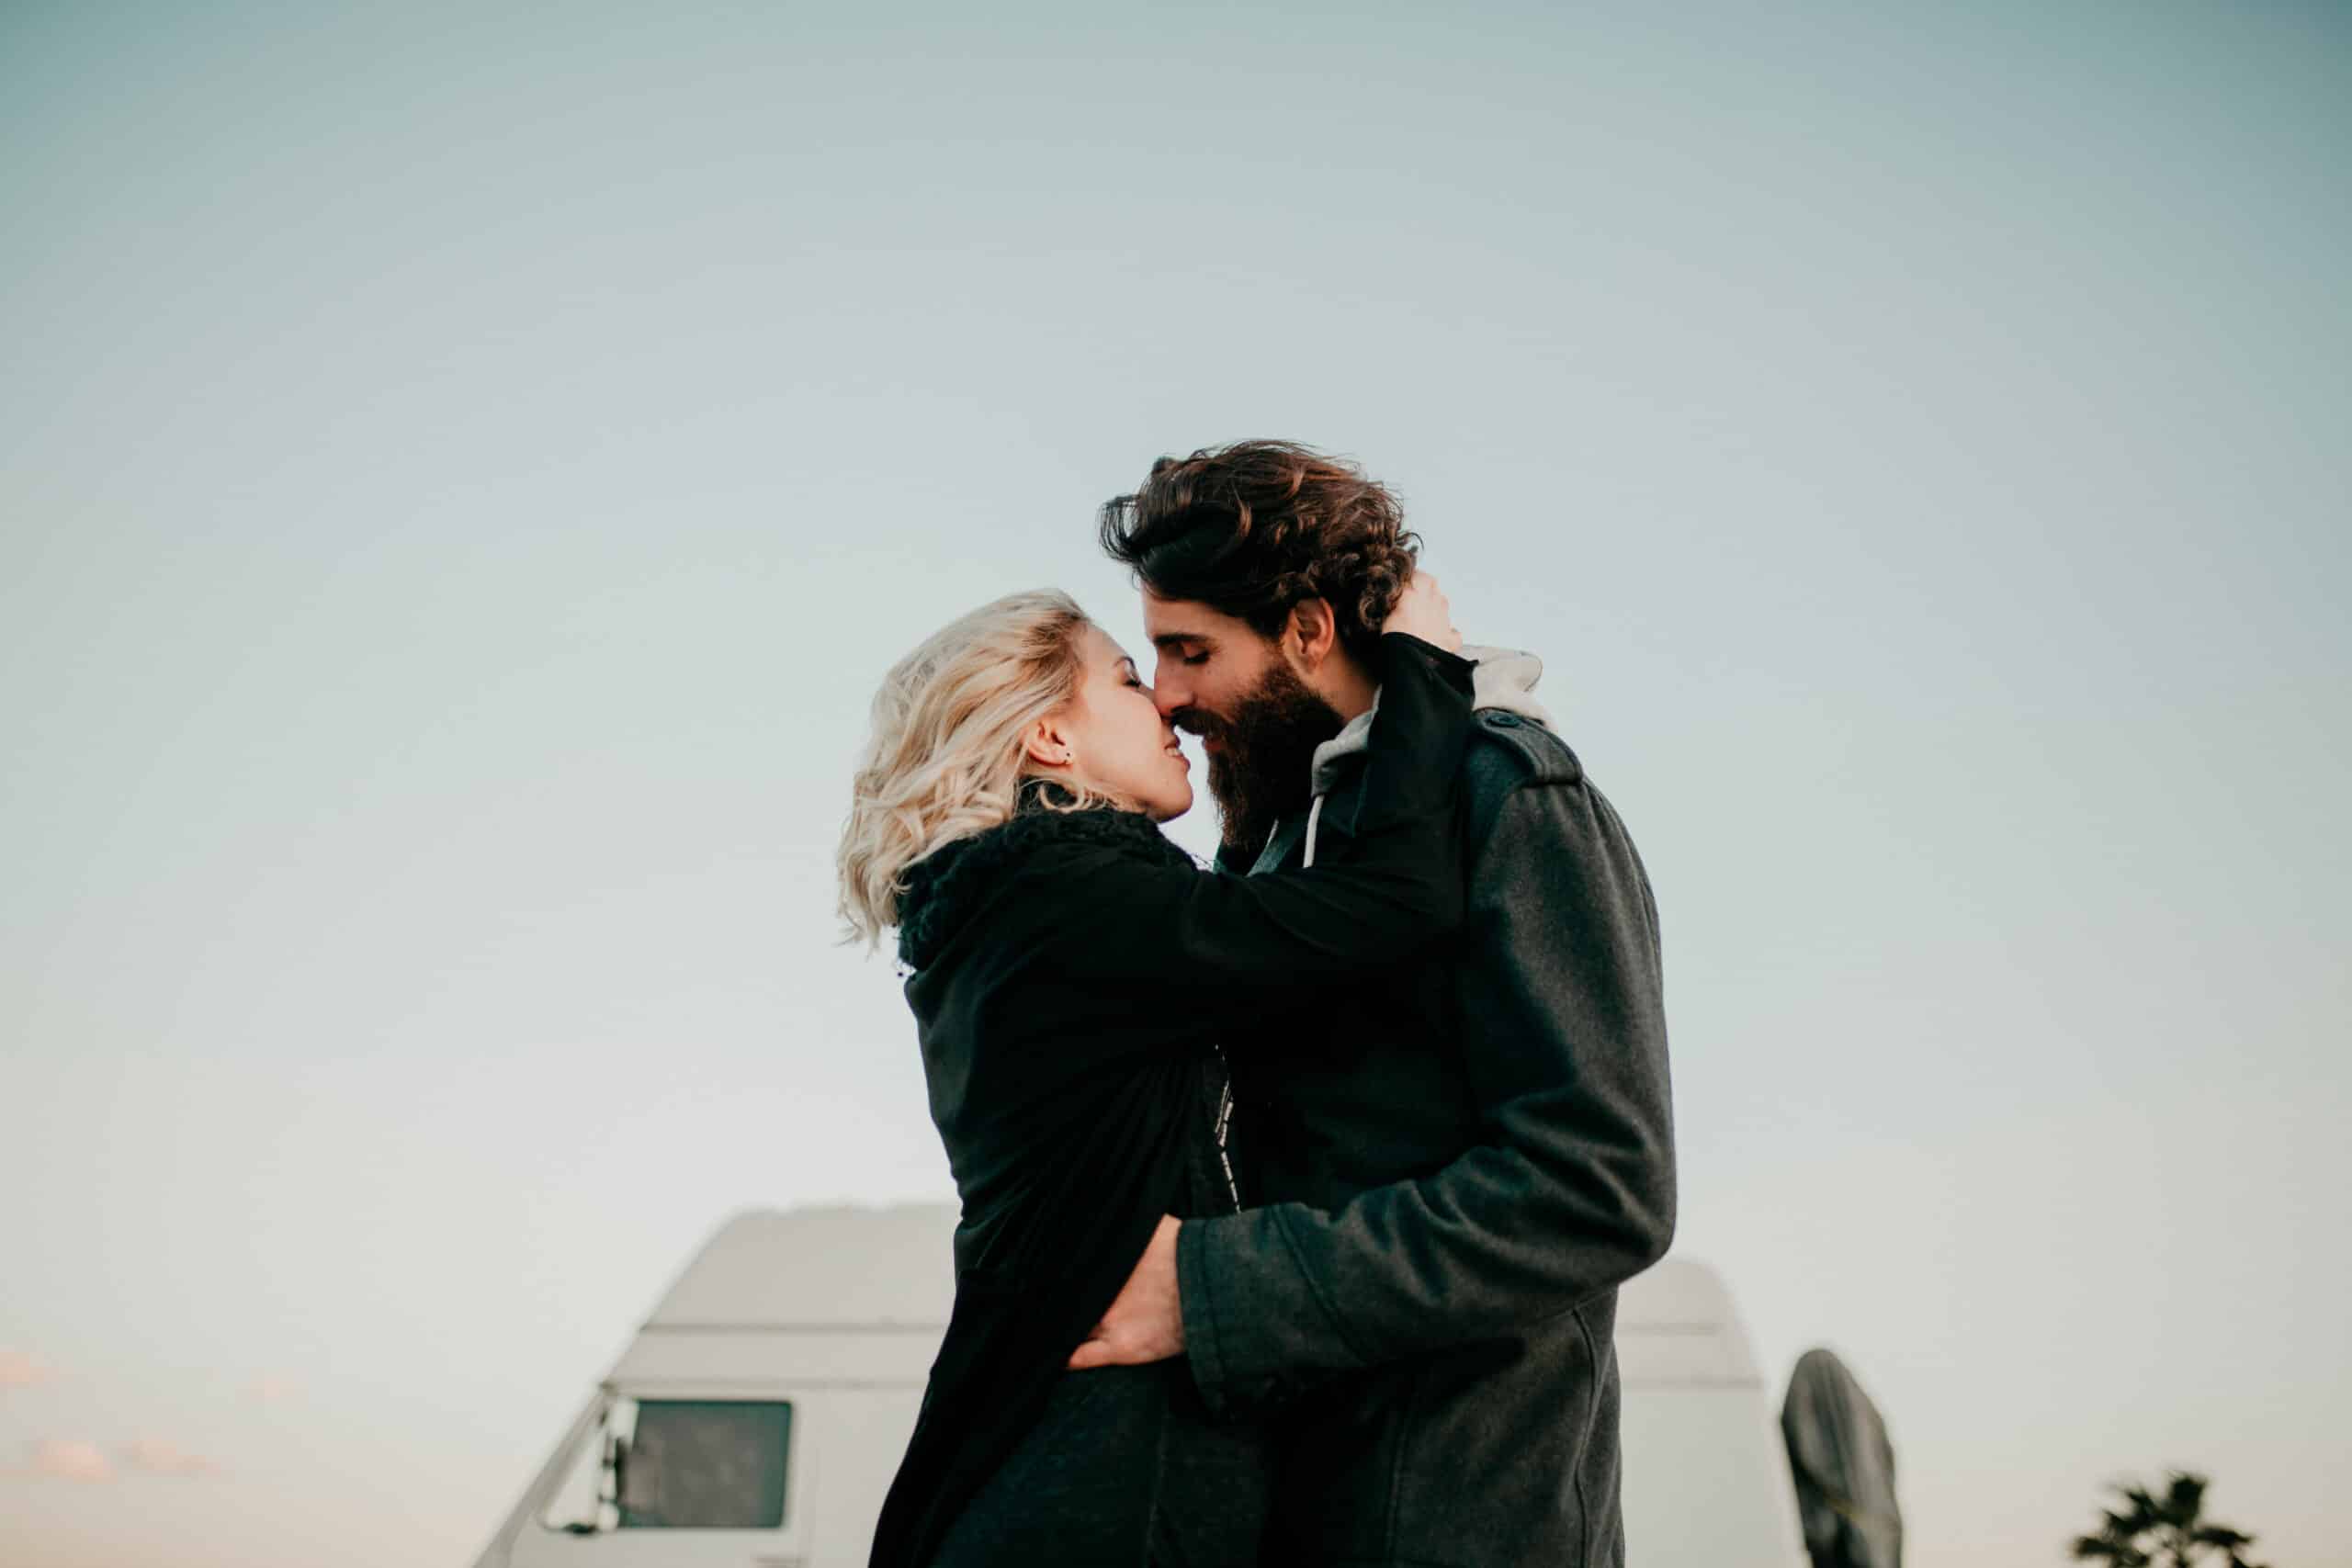 Cool young couple kissing each other outdoors while they are embracing